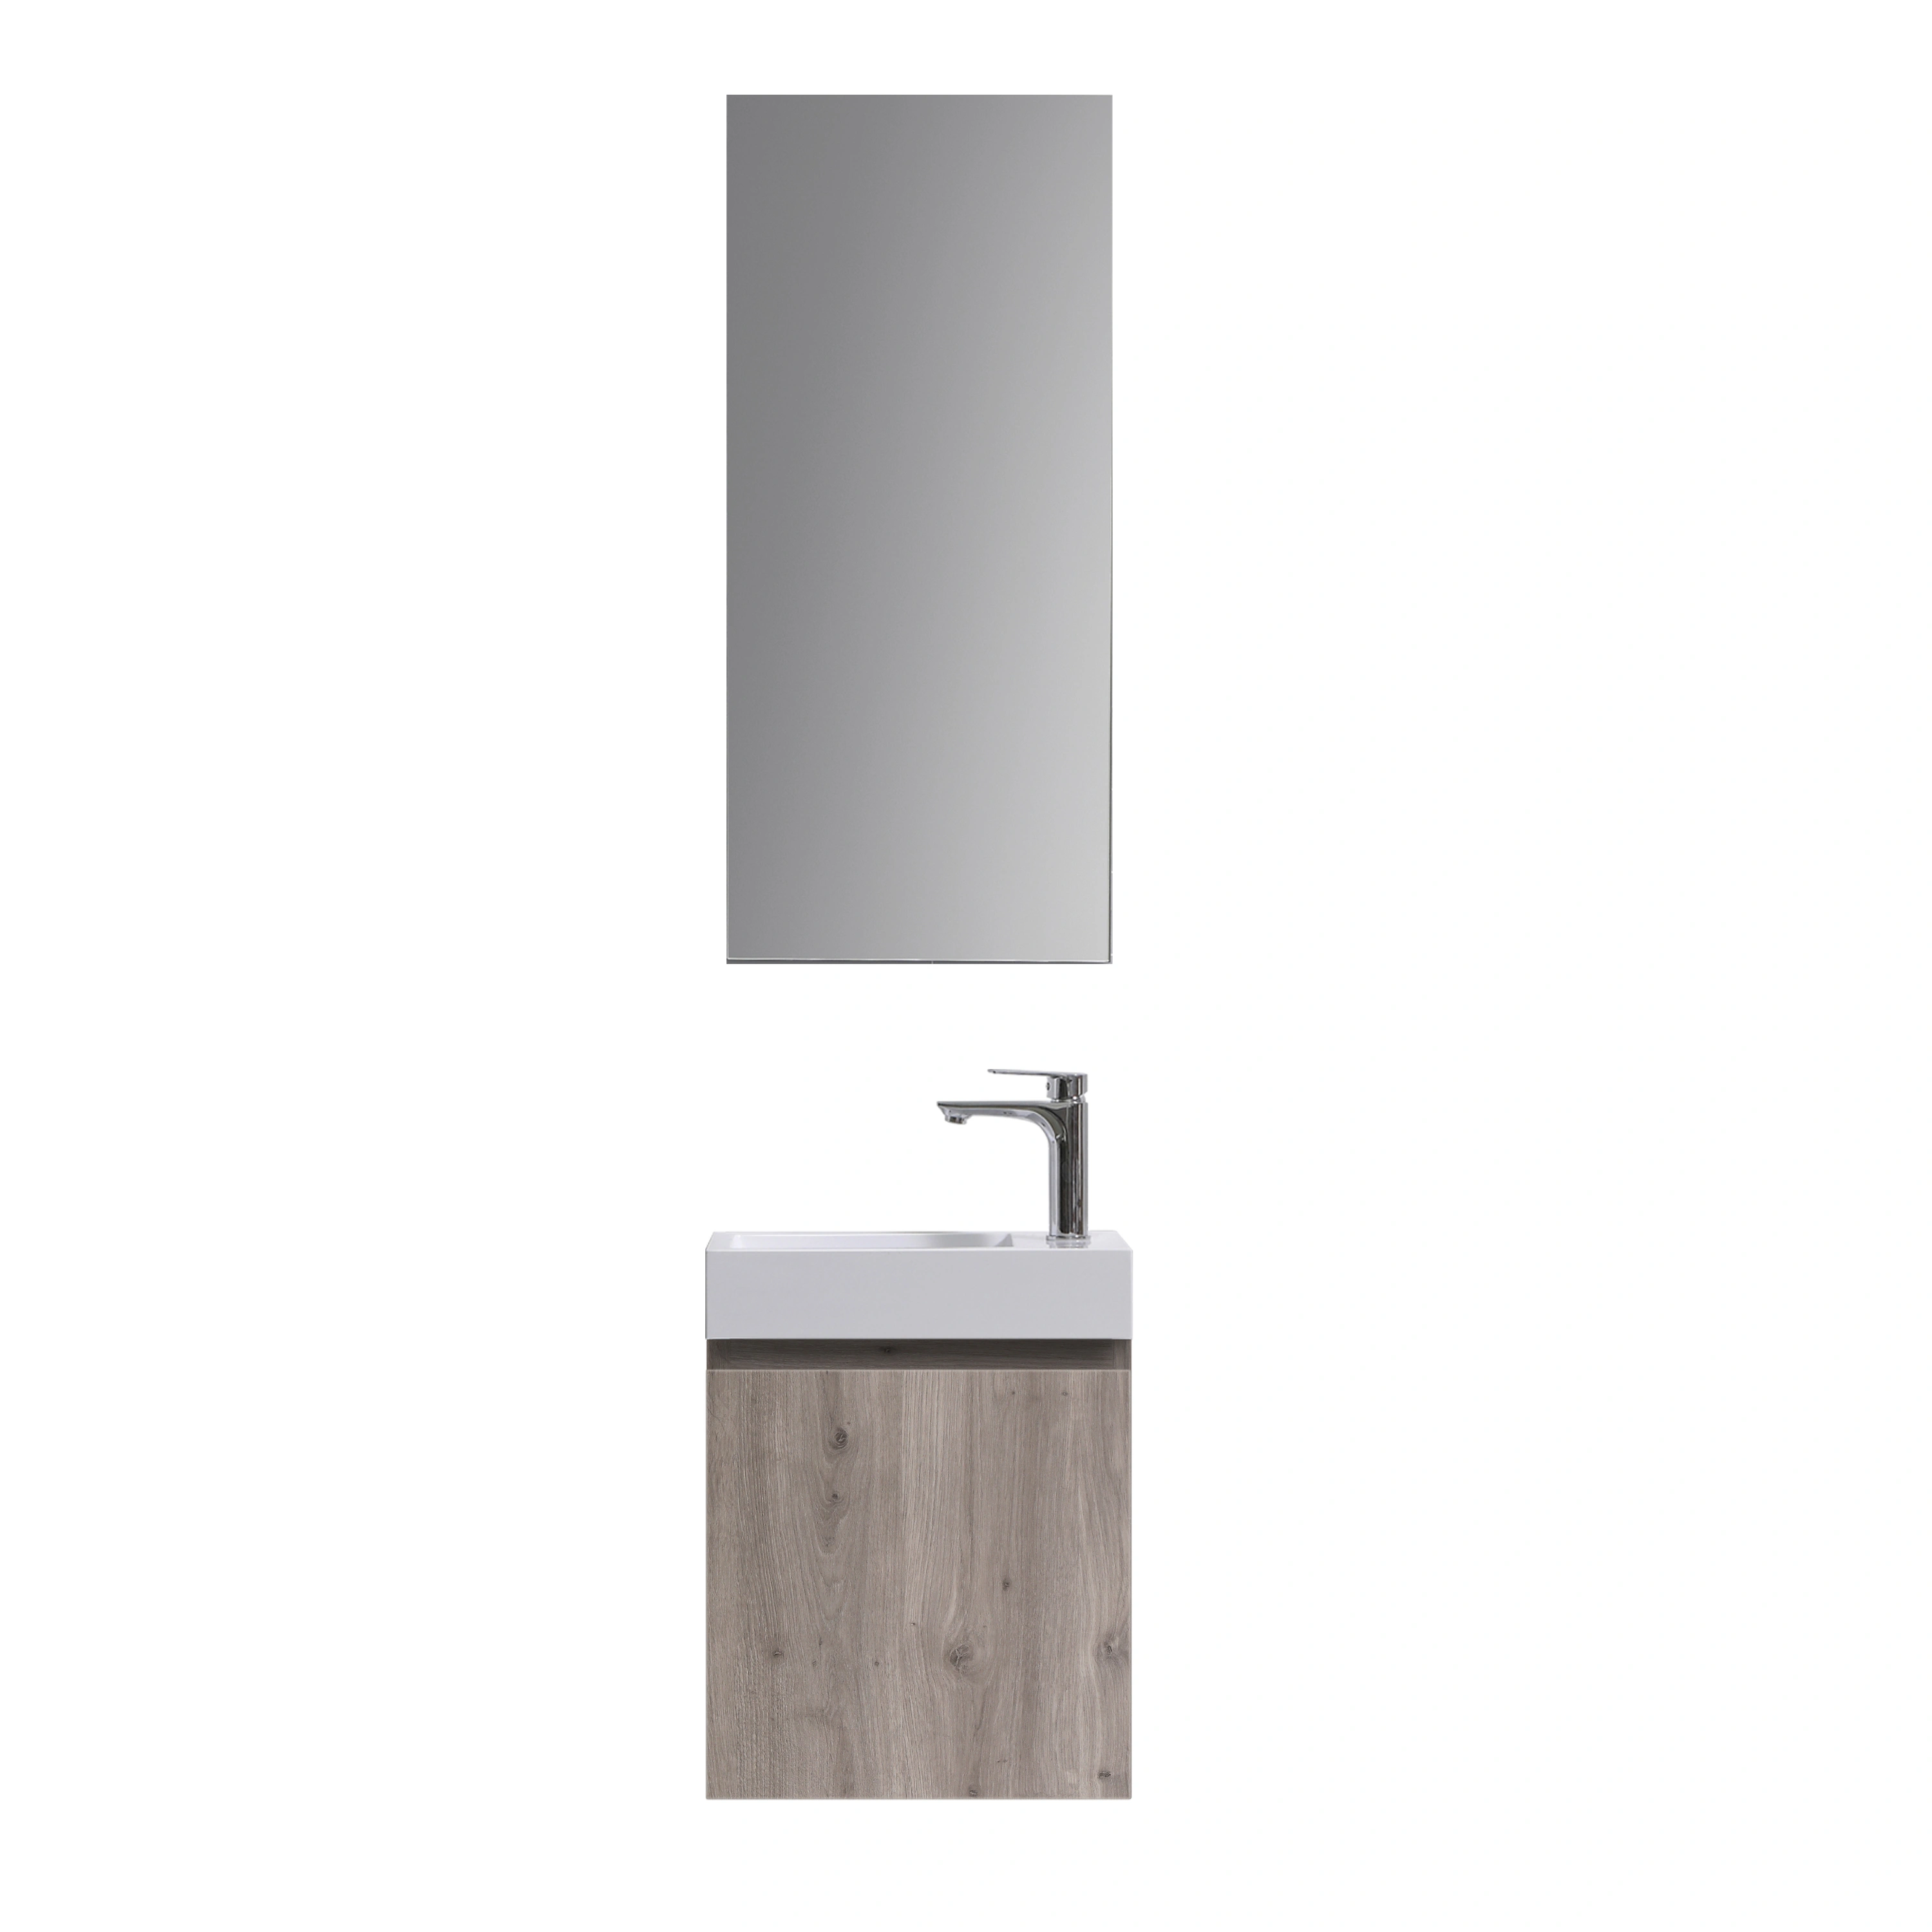 OPITRUELY AMY 460mm Commercial Melamine Bathroom Cabinet